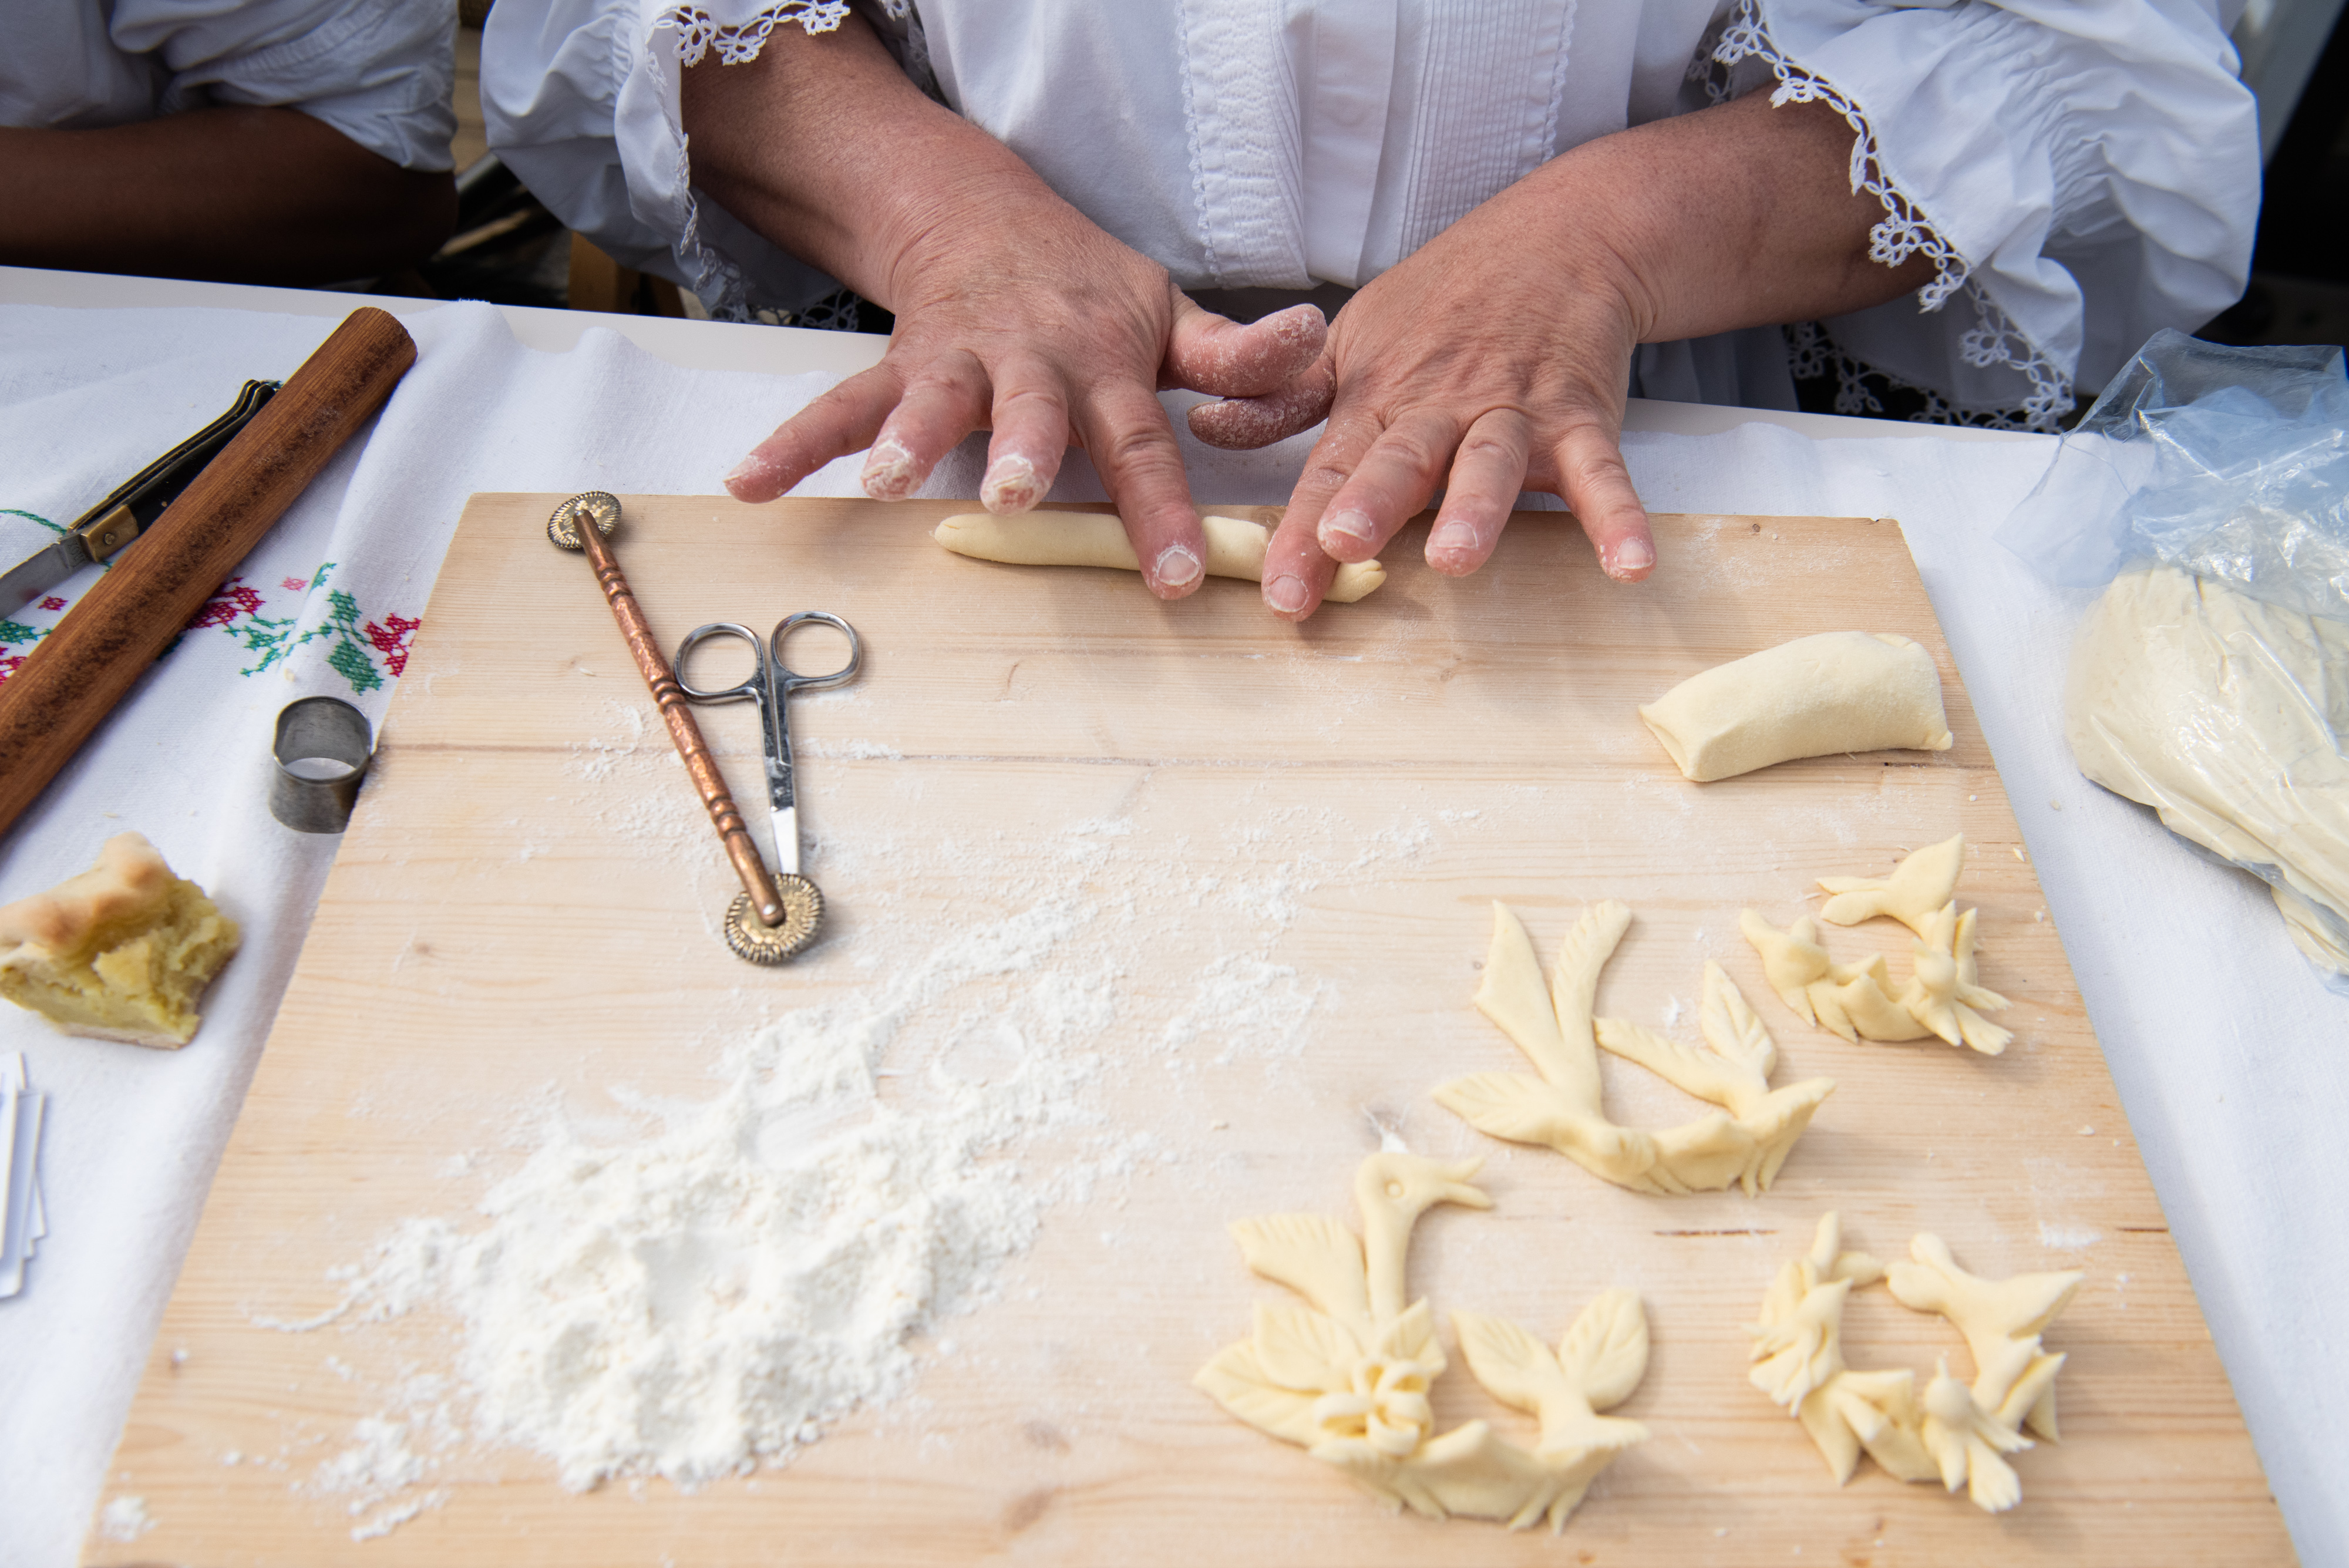 A person making decorations from bread dough